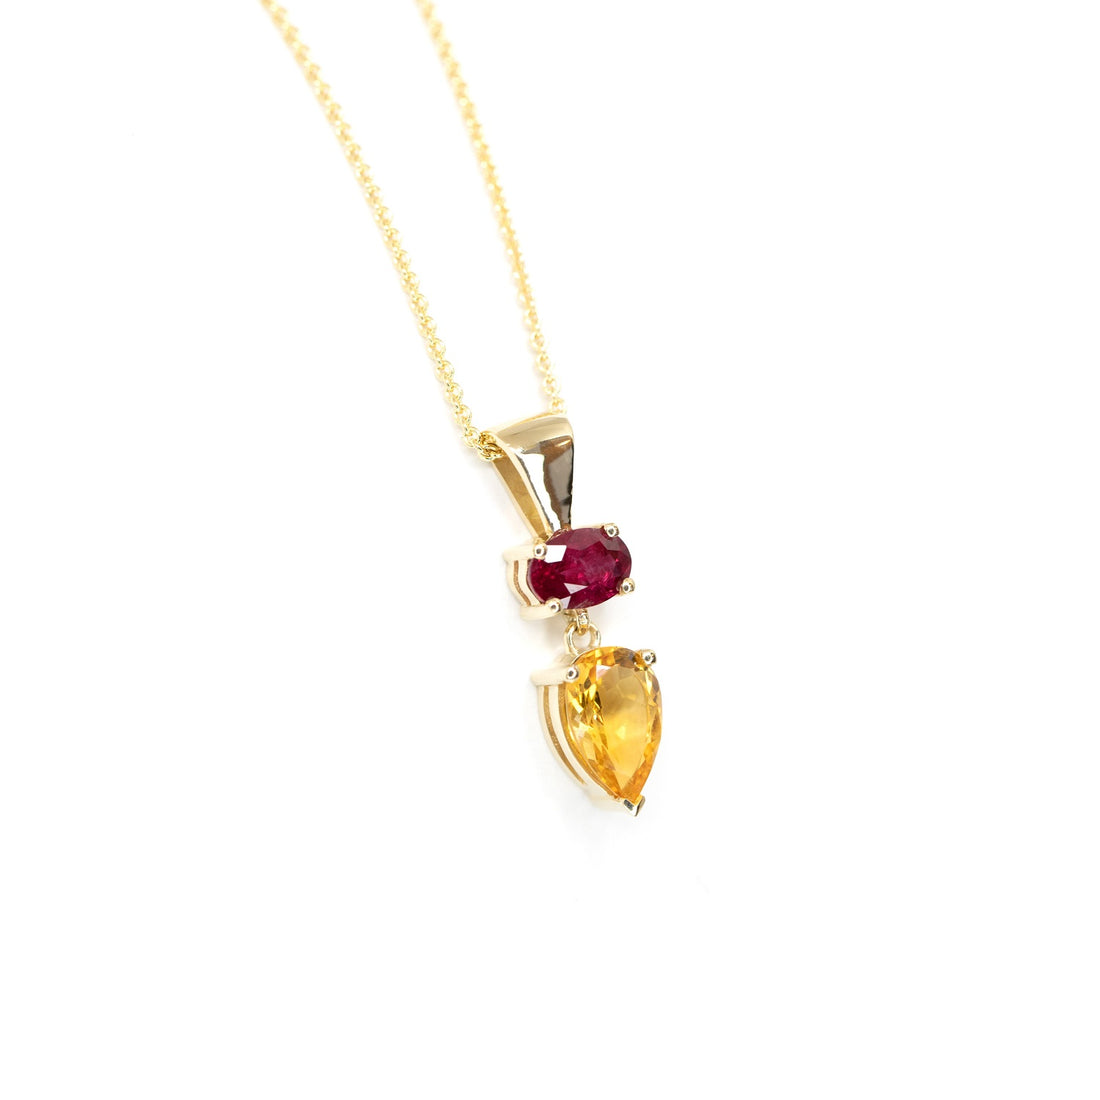 colored gemstone custom made jewelry in montreal made with citrine pear shape and oval ruby gemstone by bena jewelry on a white background